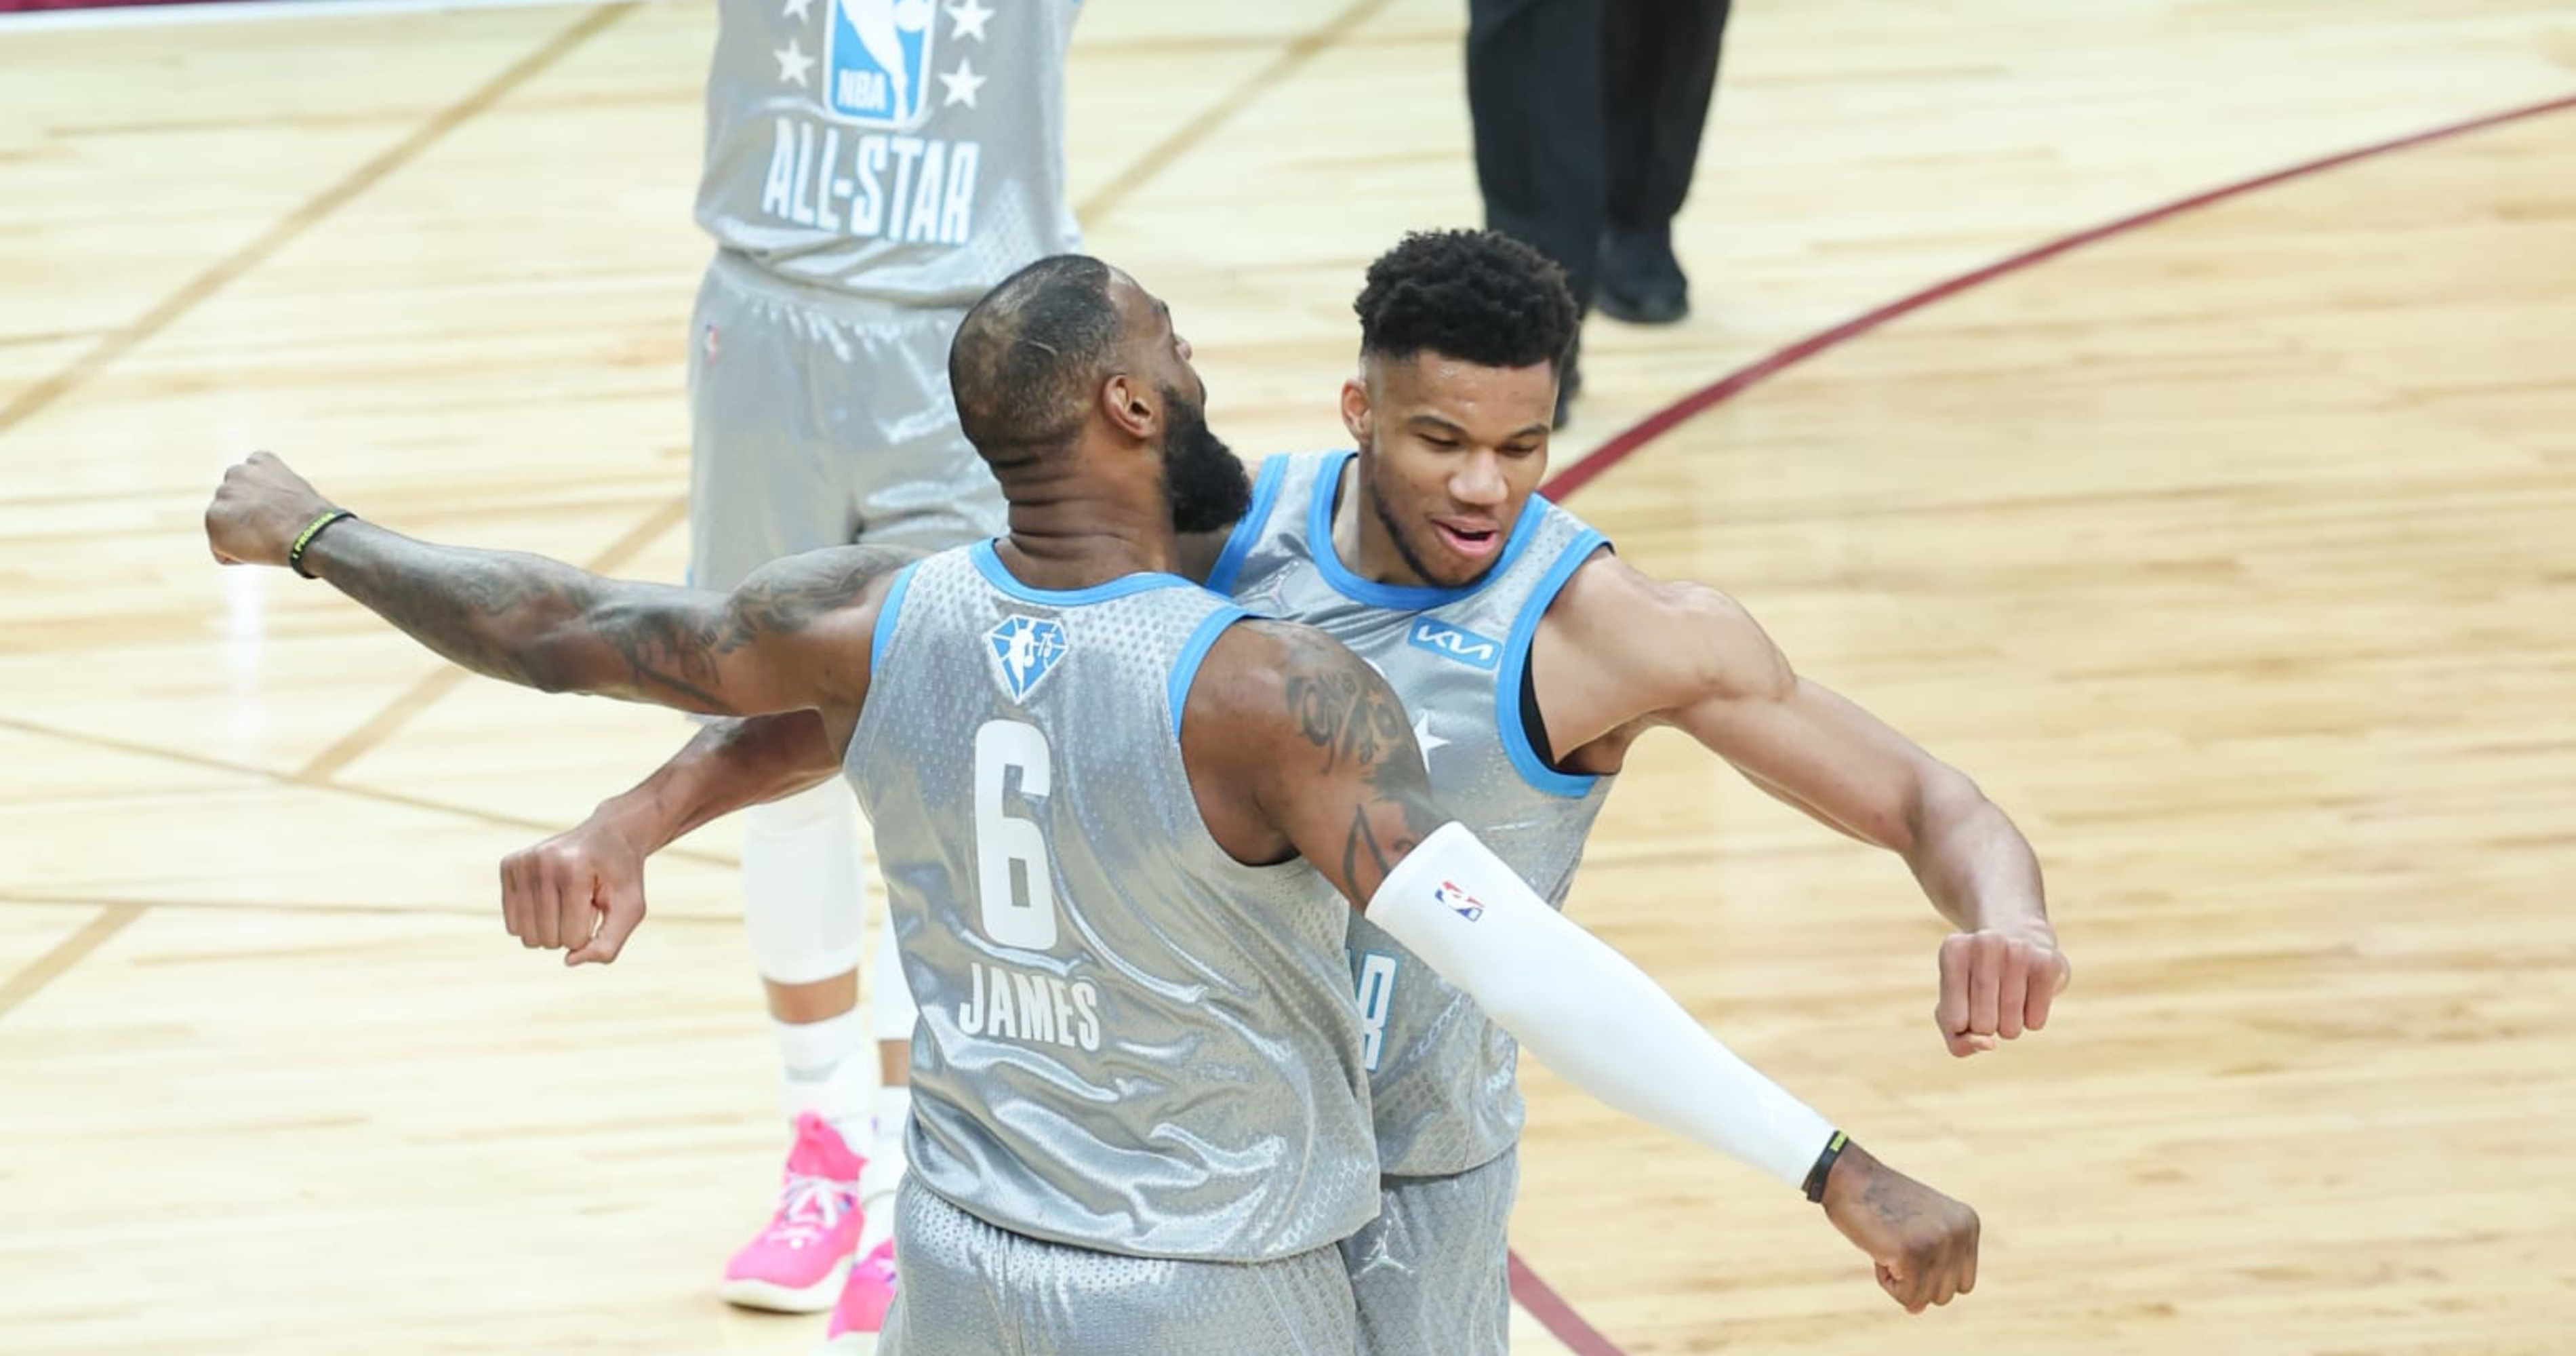 Giannis Antetokounmpo scores 30 to help Team LeBron James beat Team Kevin  Durant in NBA all-star game